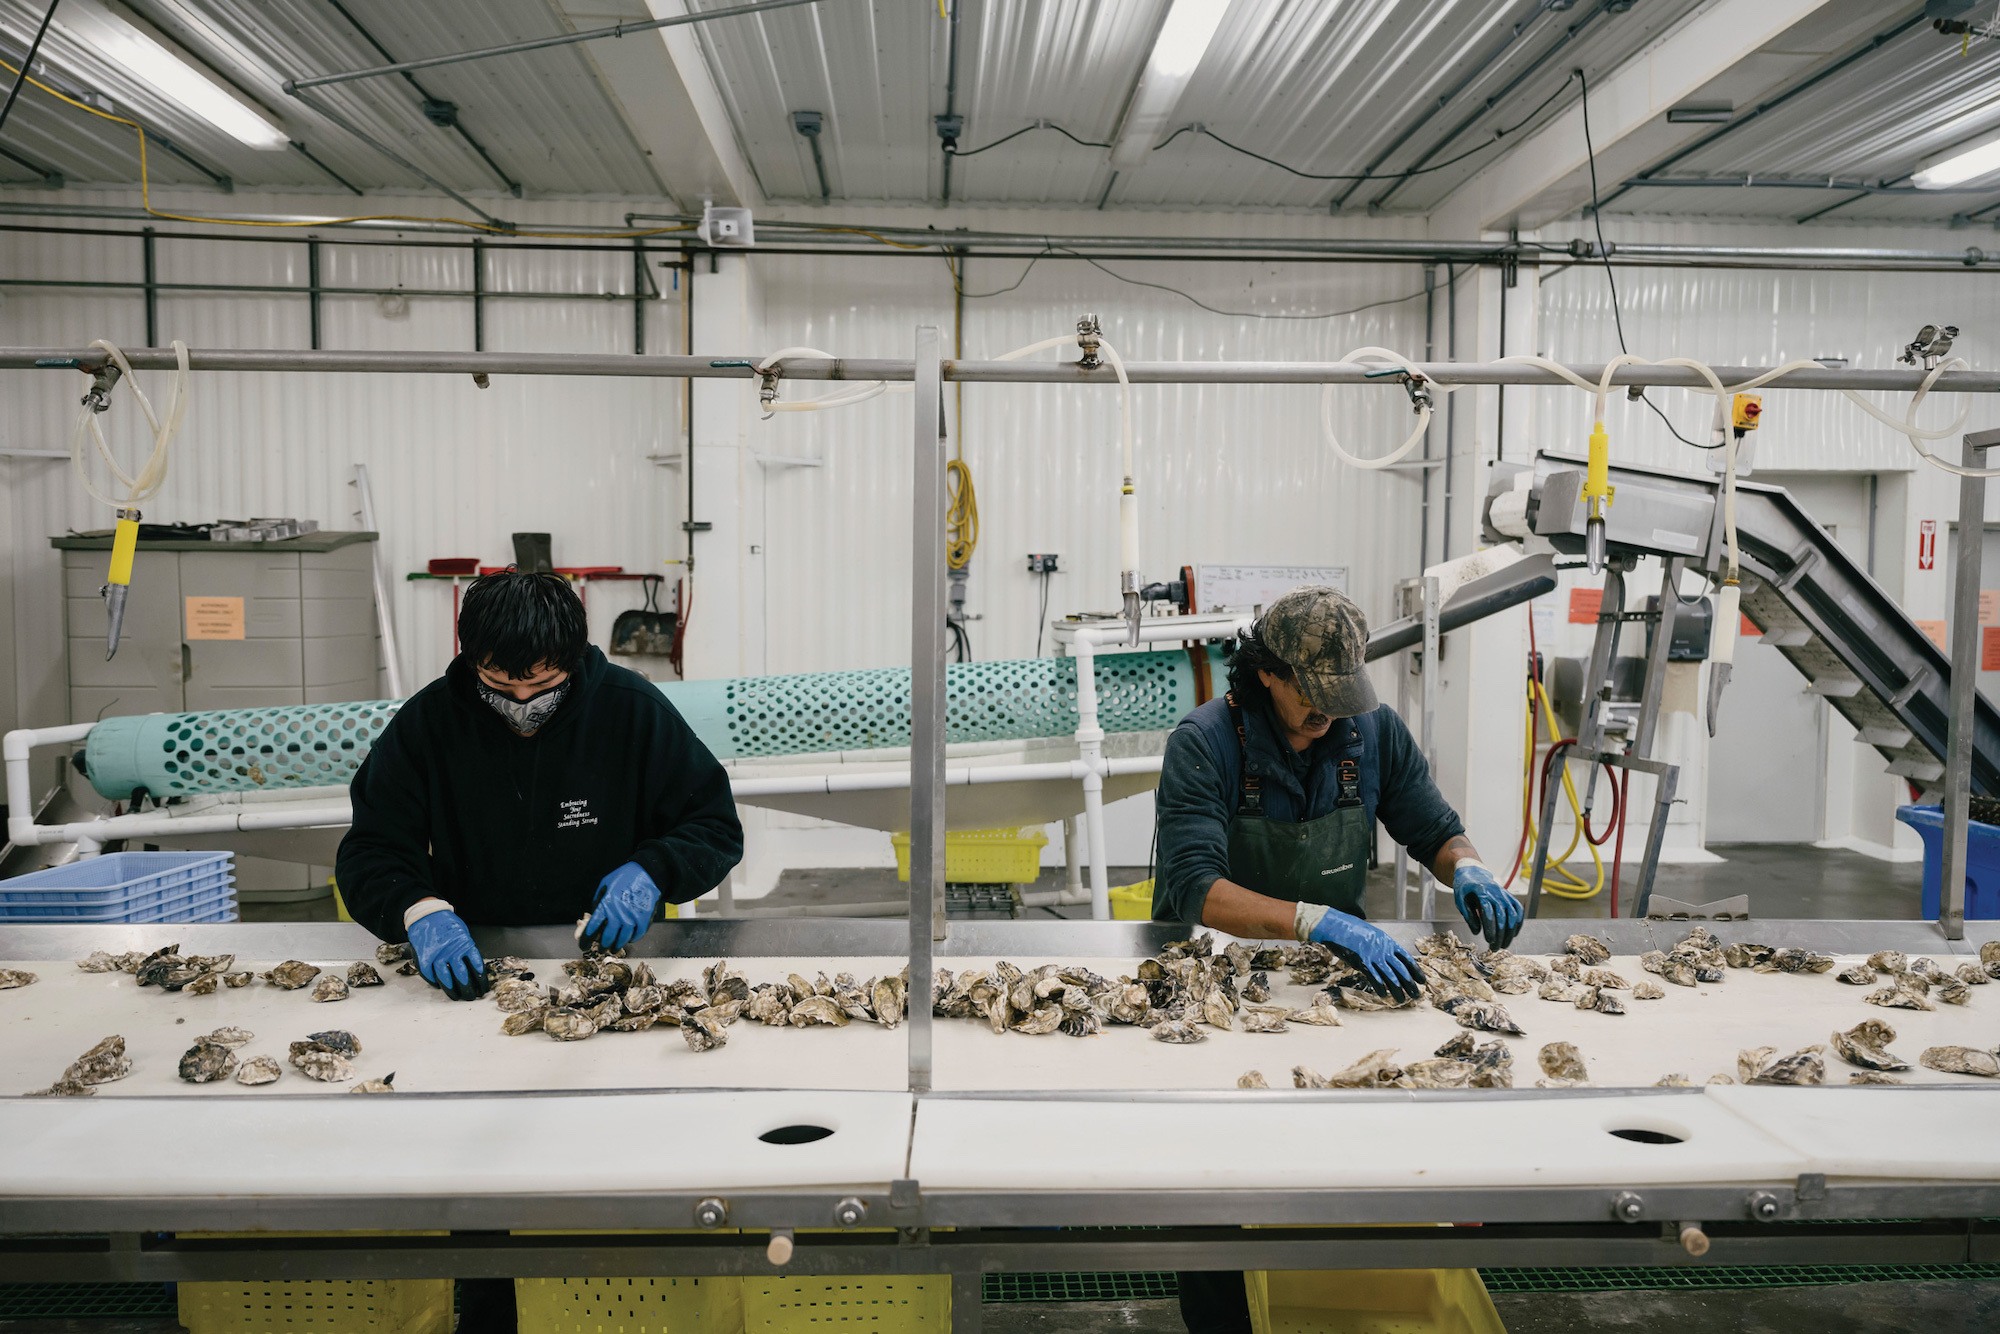 Jimmie and Clark clean and sort oysters at the Swinomish Shellfish Company’s sorting facility. 2021